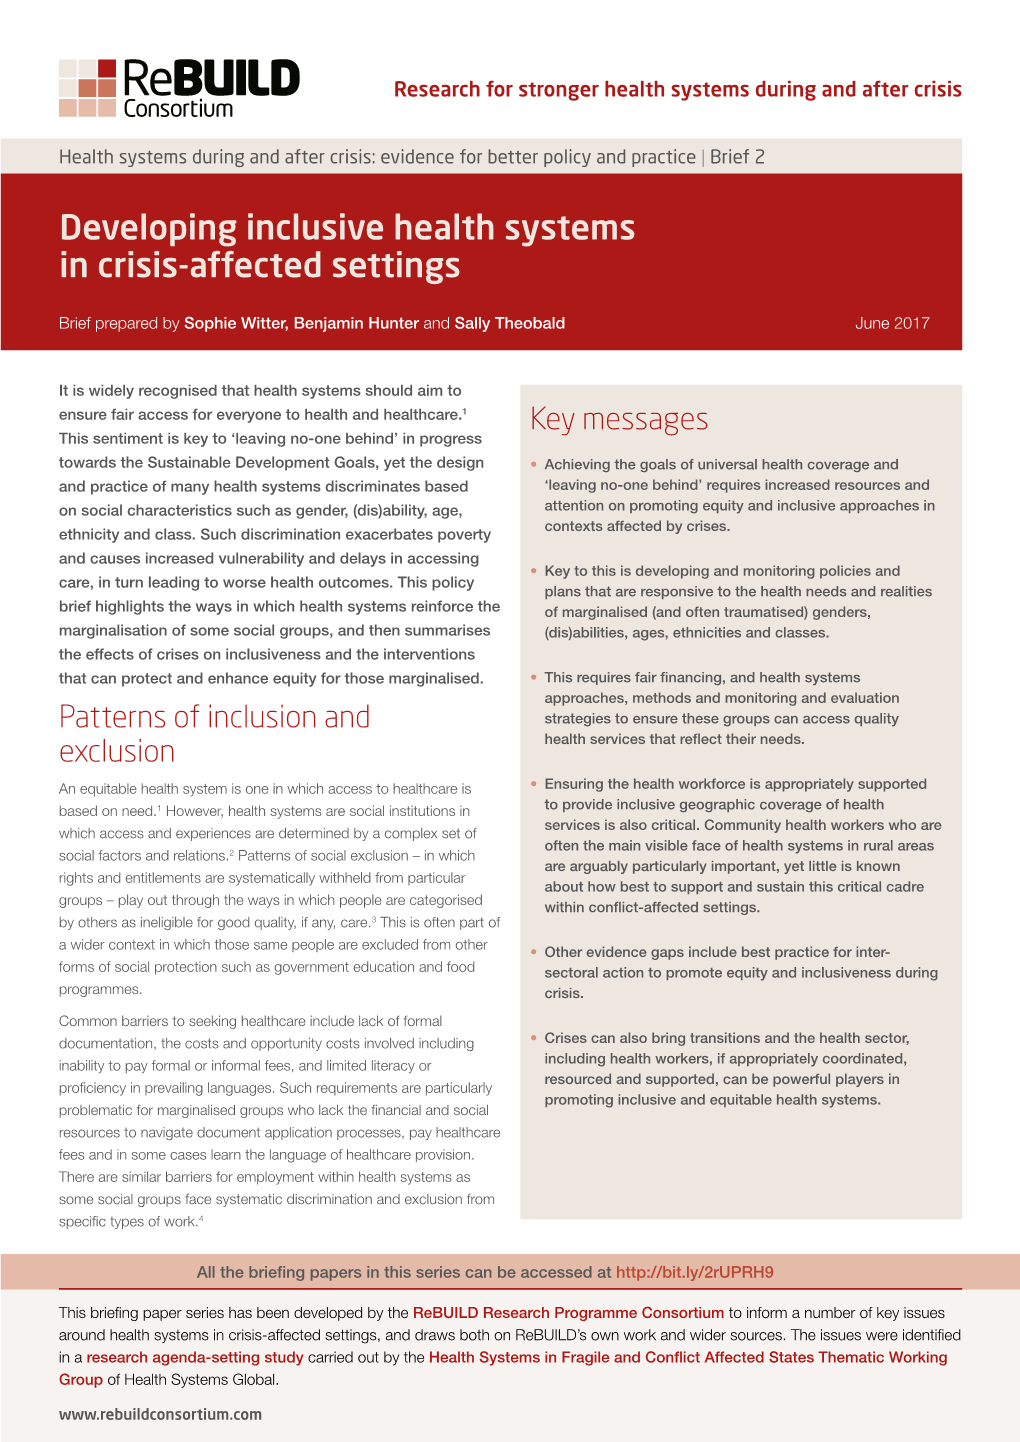 Developing Inclusive Health Systems in Crisis-Affected Settings